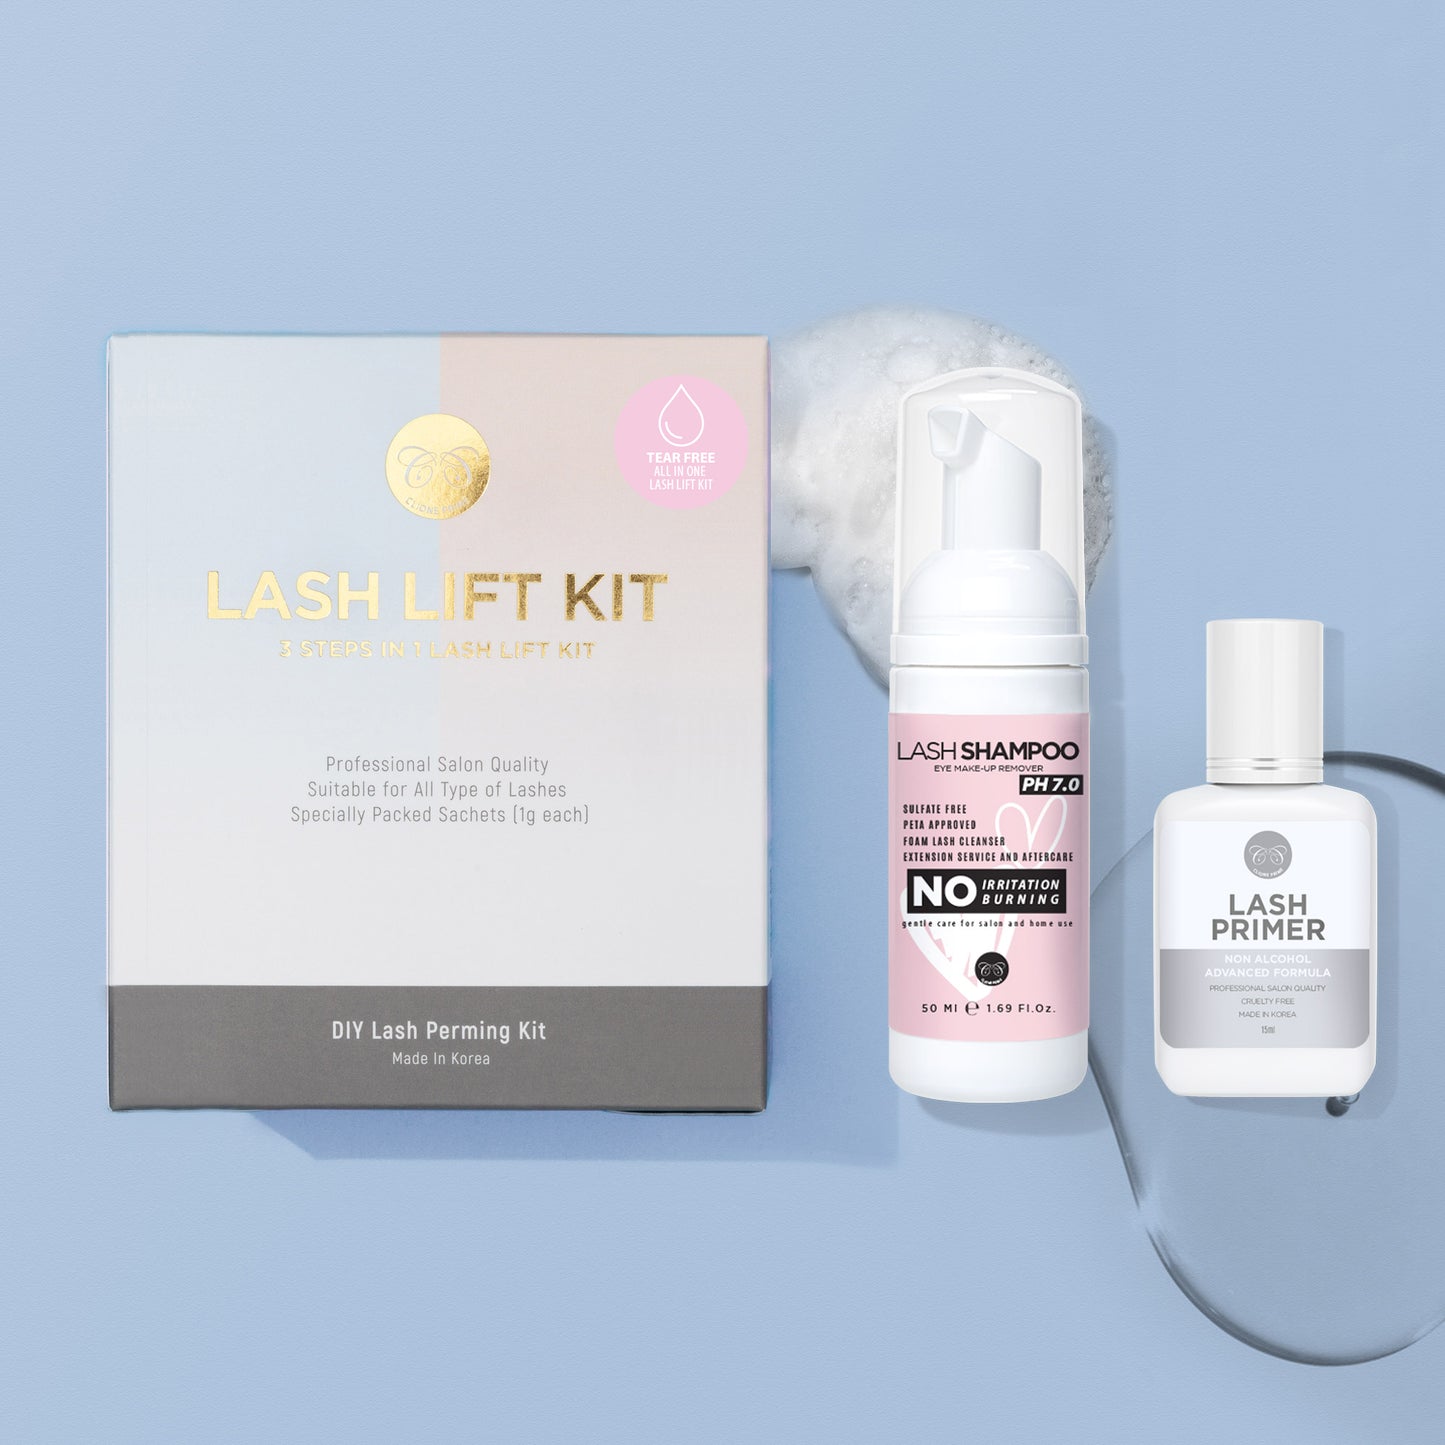 All In One Lash Lift Kit